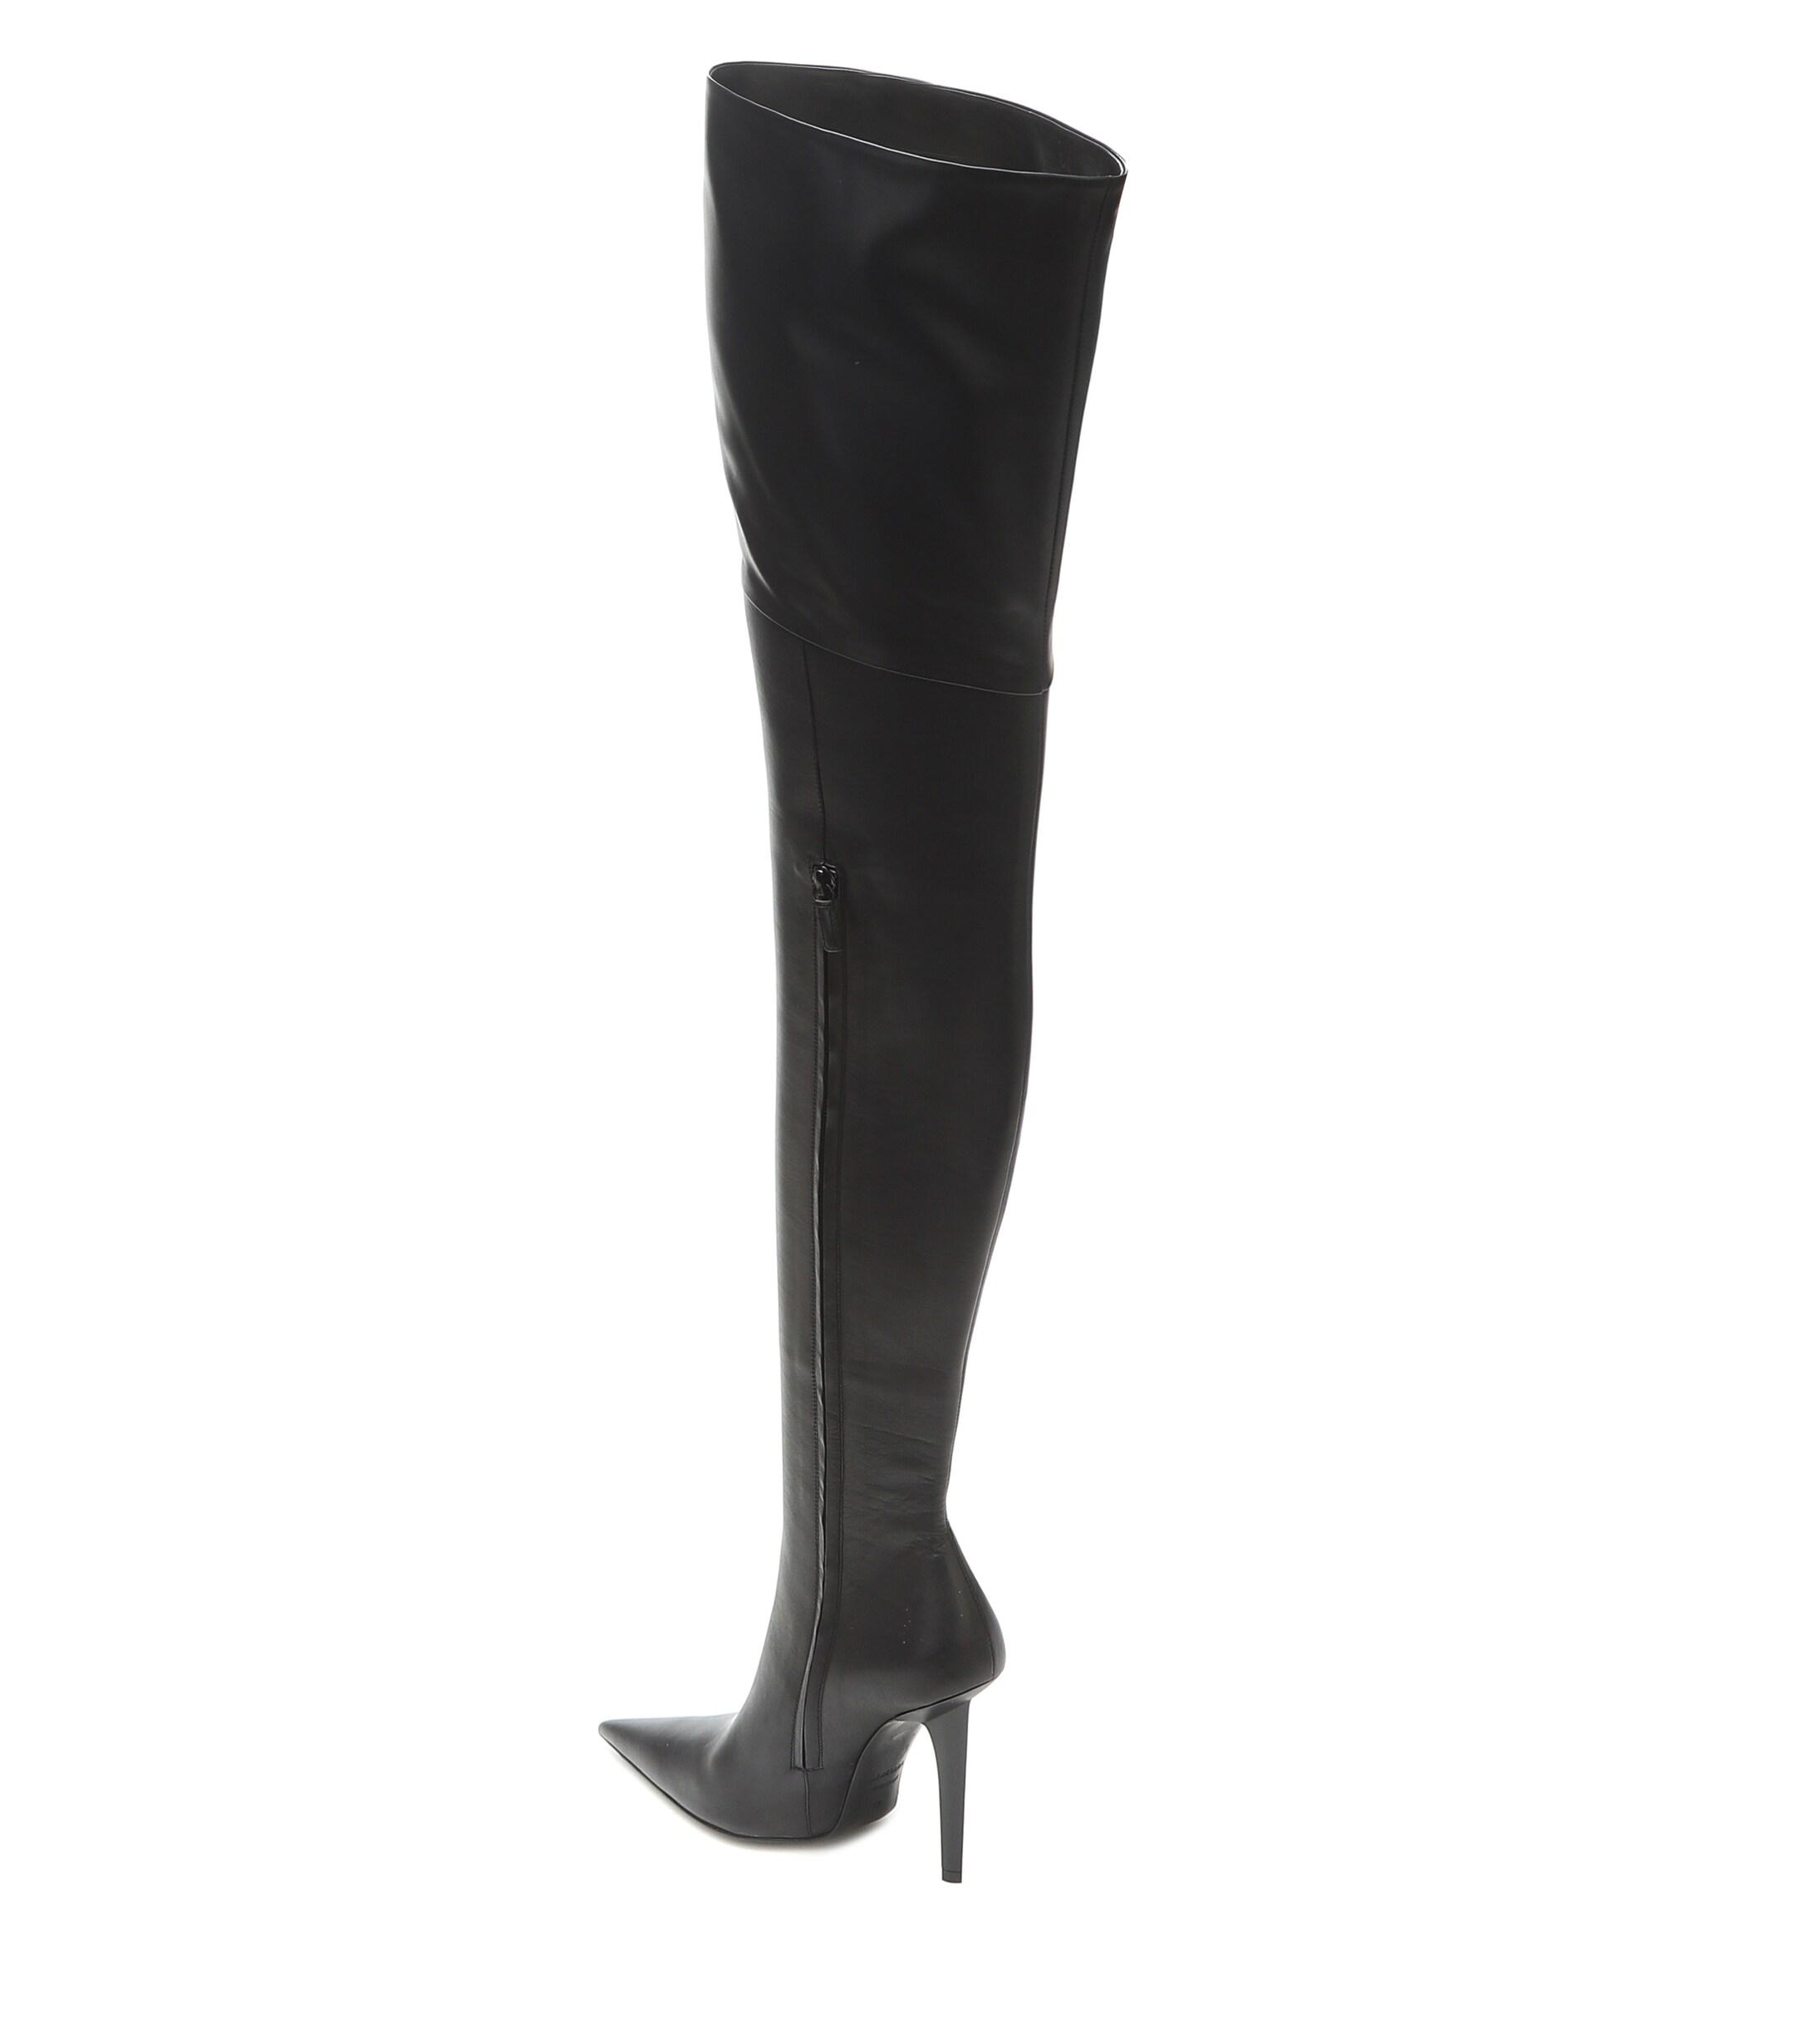 Balenciaga Knife Shark Over-the-knee Leather Boots in Black